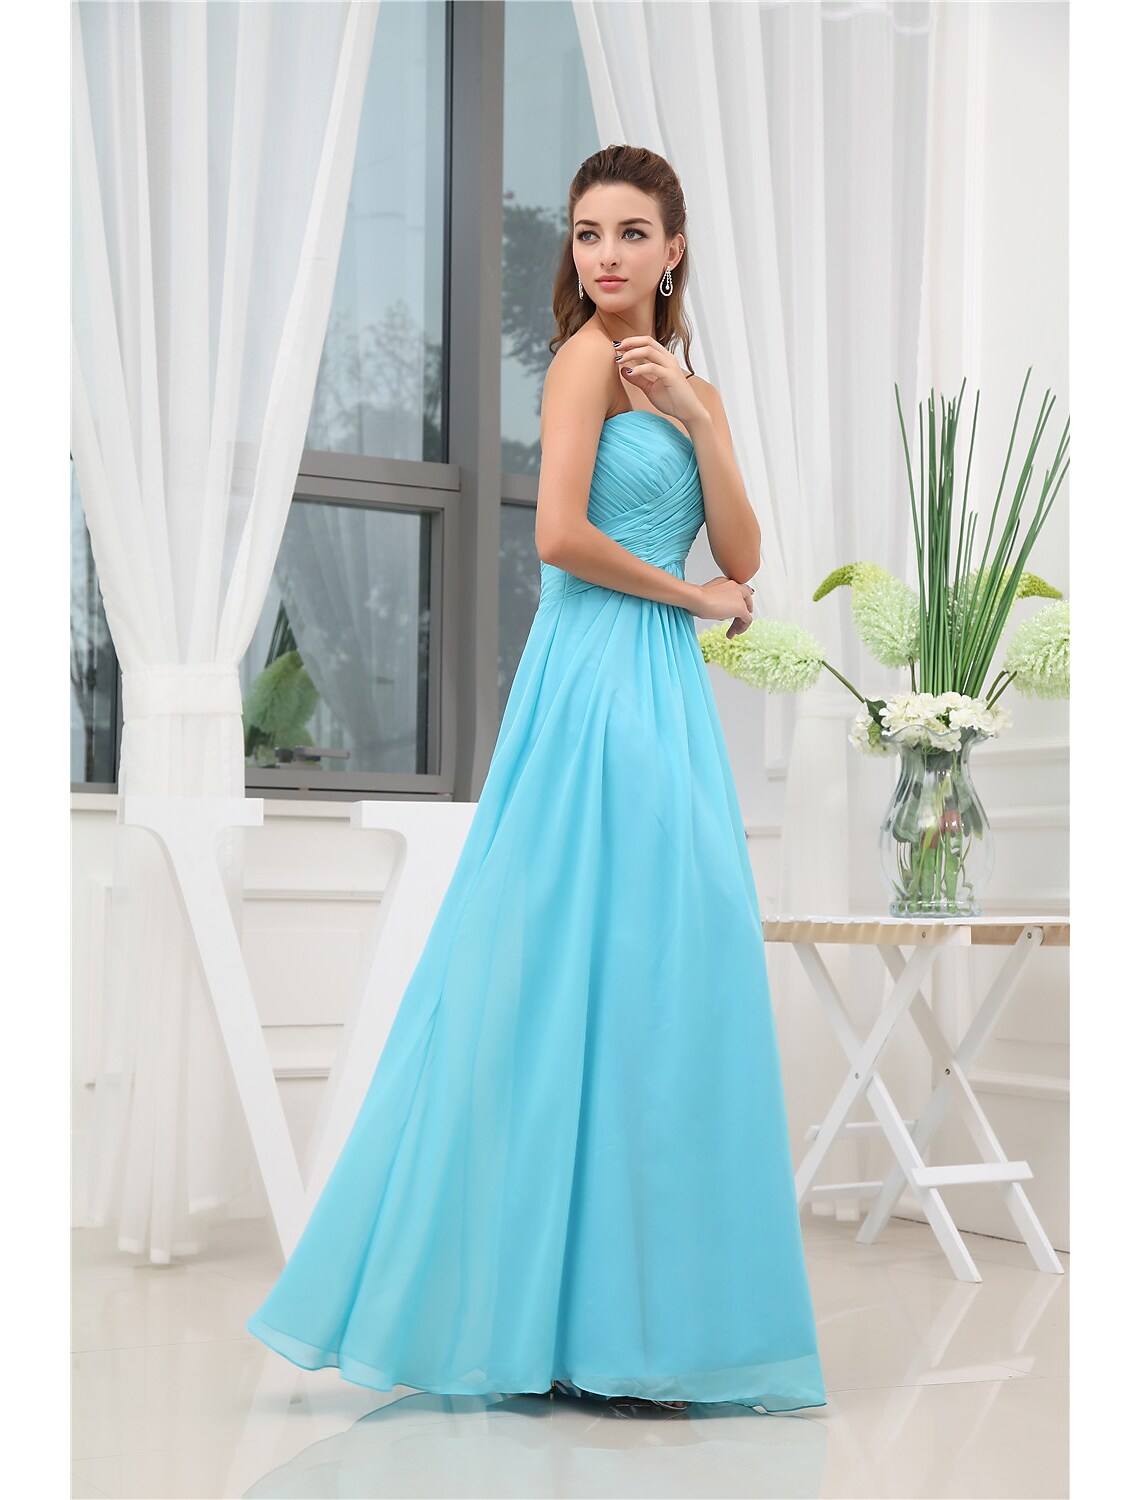 A-Line Evening Gown Elegant Floor Length Sleeveless Chiffon with Pleats Ruched